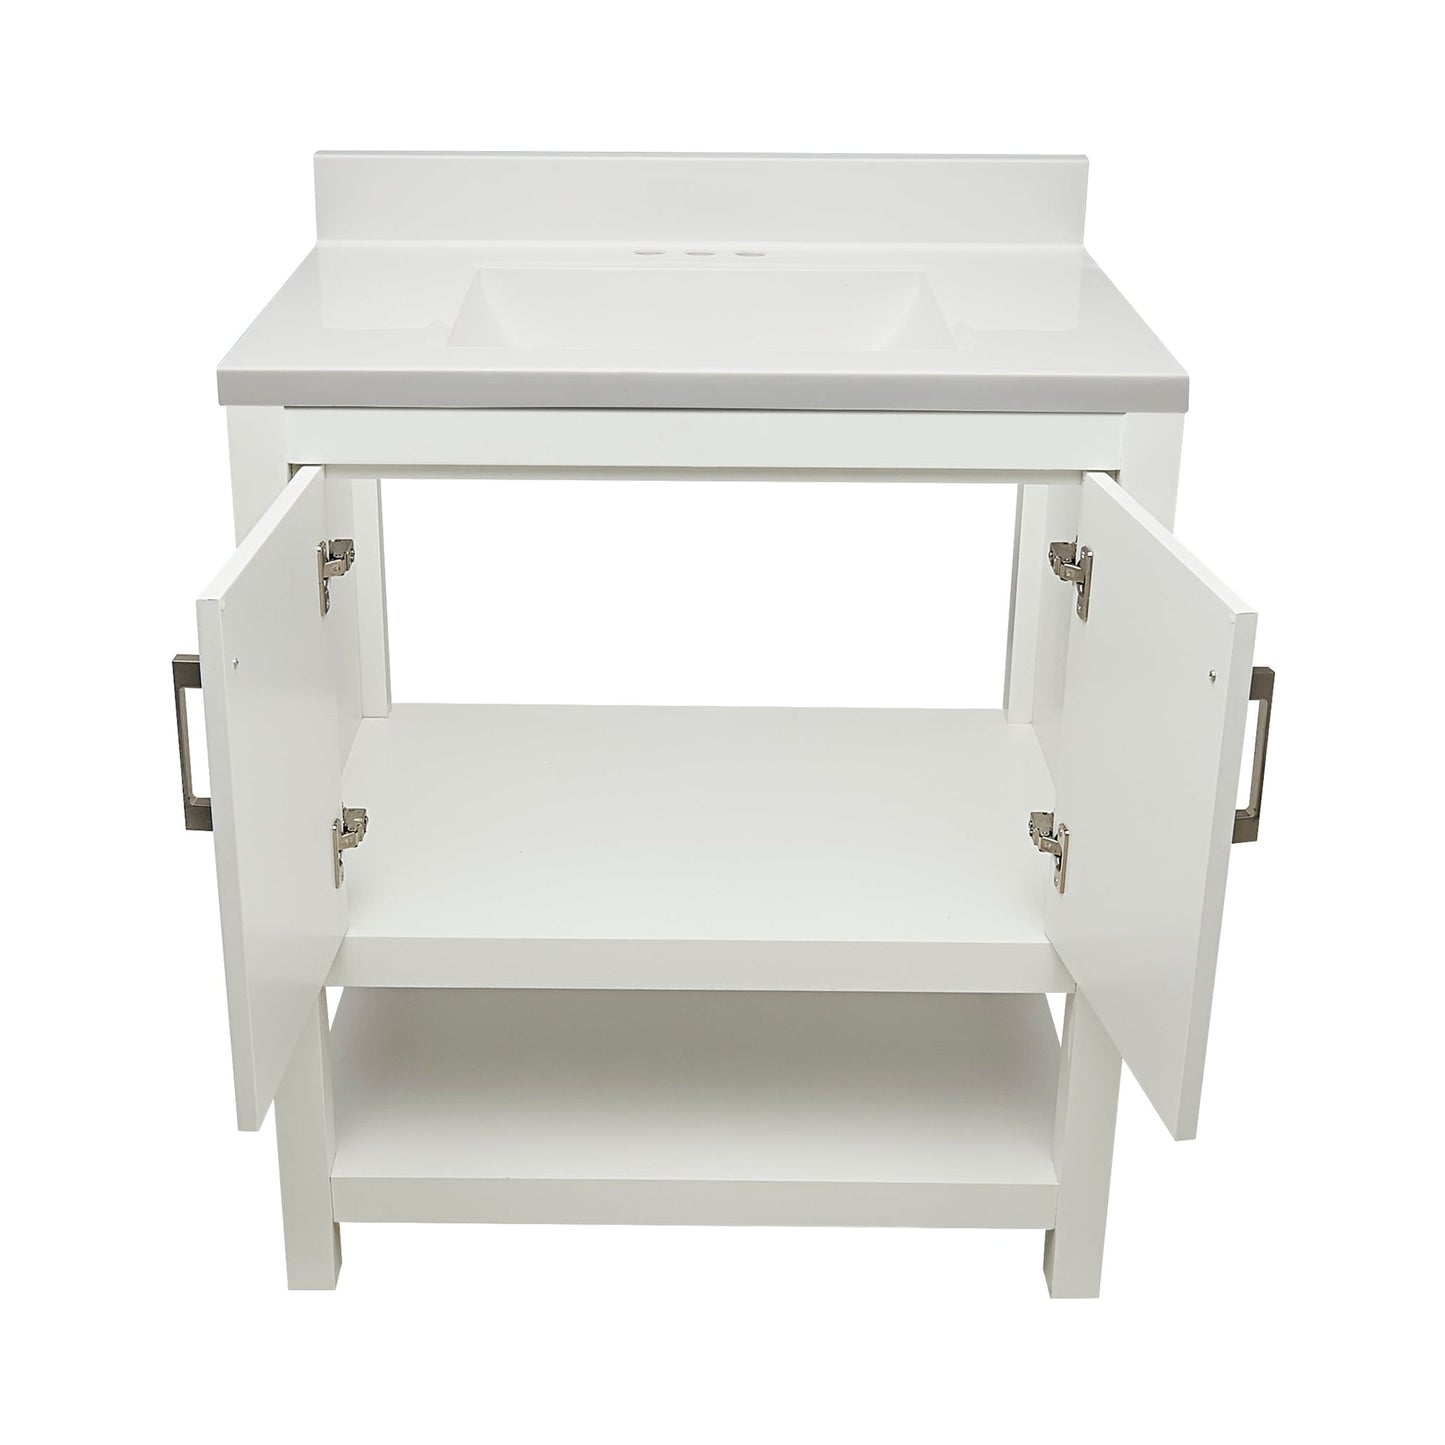 Ella's Bubbles Taos 31" White Bathroom Vanity With White Cultured Marble Top With White Backsplash and Sink